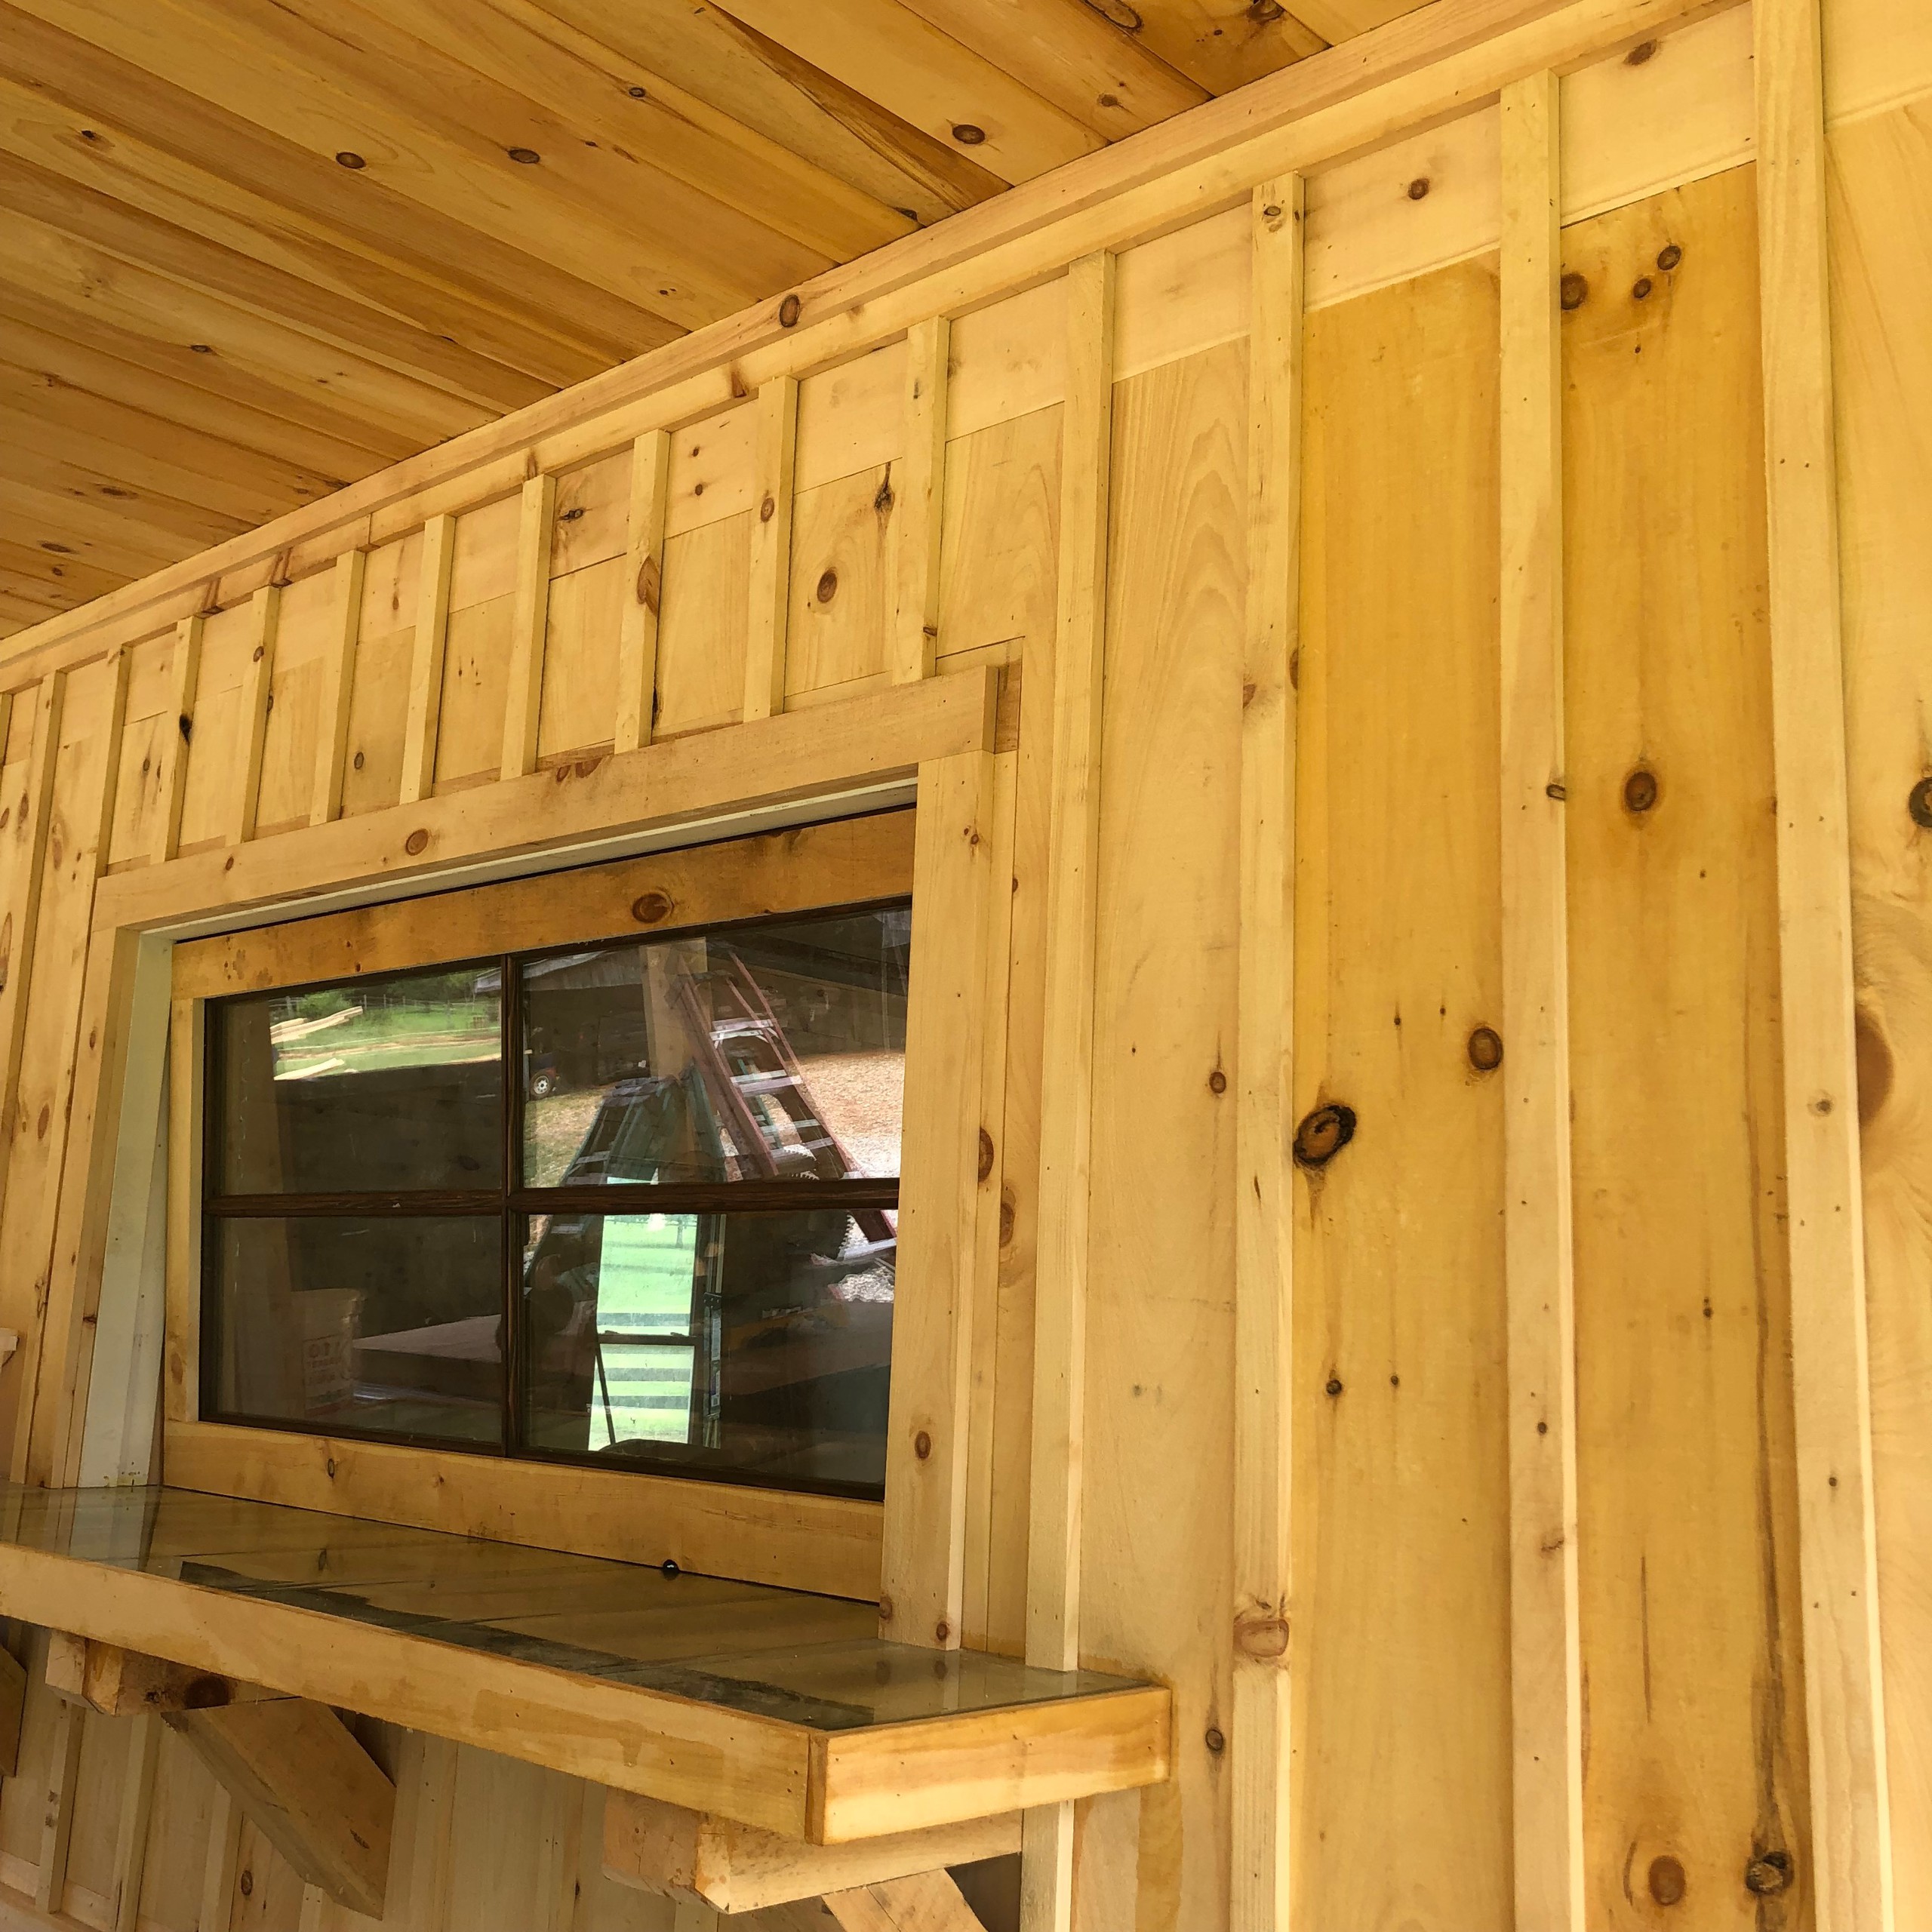 Man Cave Garage Remodel Rough Sawn Lumber Board And Batten Exterior Farmhouse Garage Atlanta By Green Source Homes Houzz